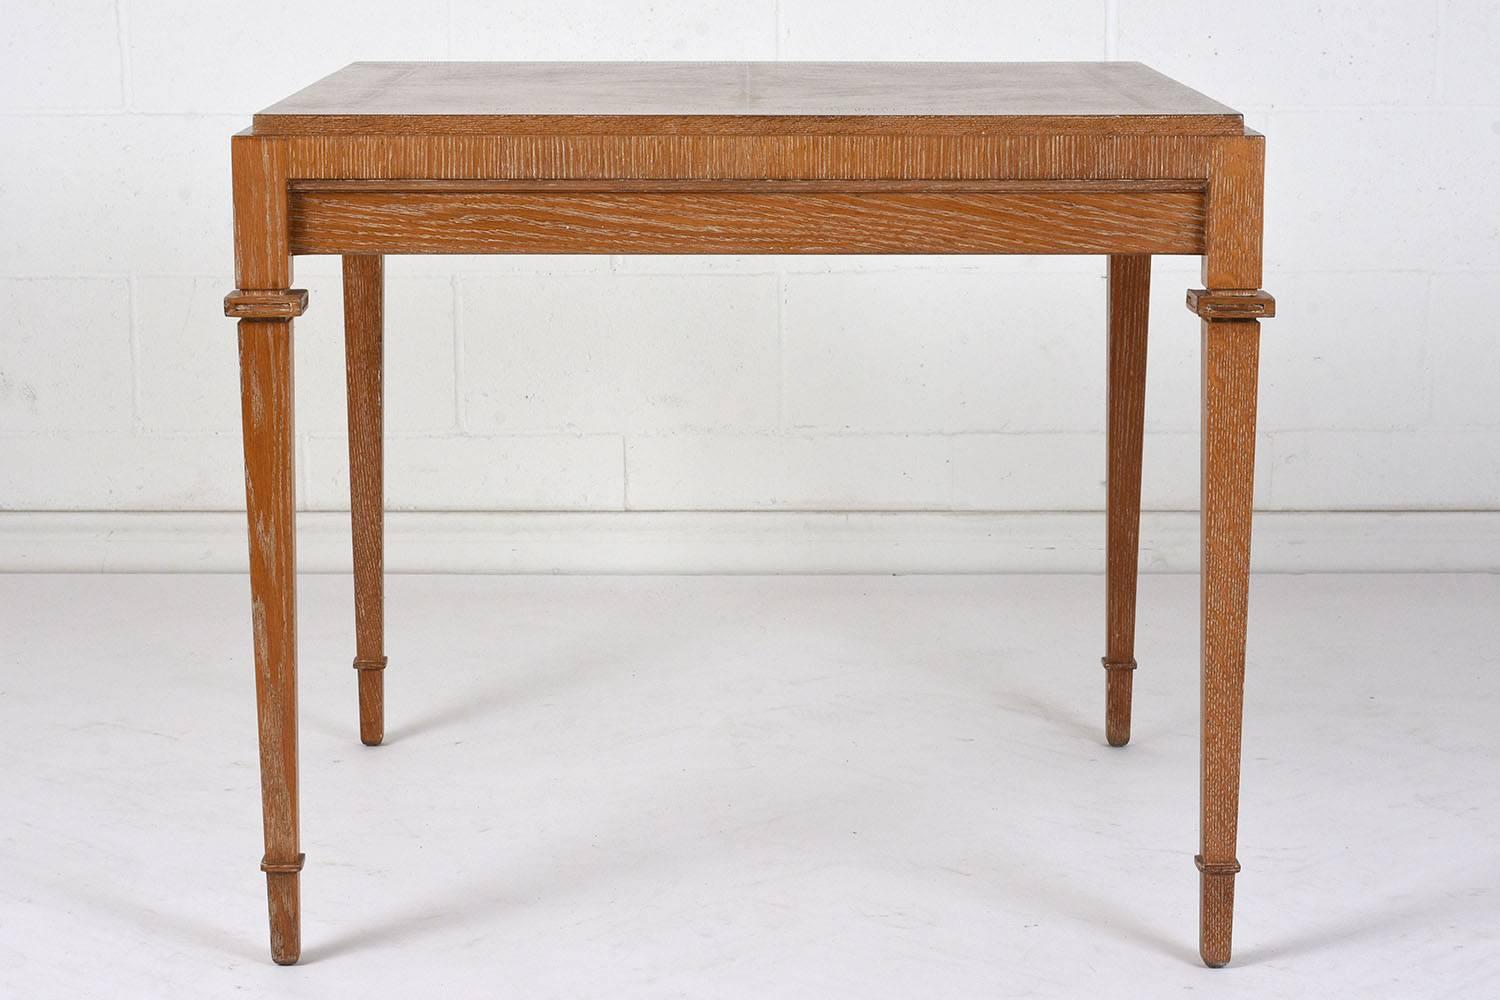 This 1960s modern style game table is made of ashwood with a white wash finish and parquetry details. The table have geometric parquetry details on the top. The tapered legs have carved bands at the top and bottom. The table can be converted three